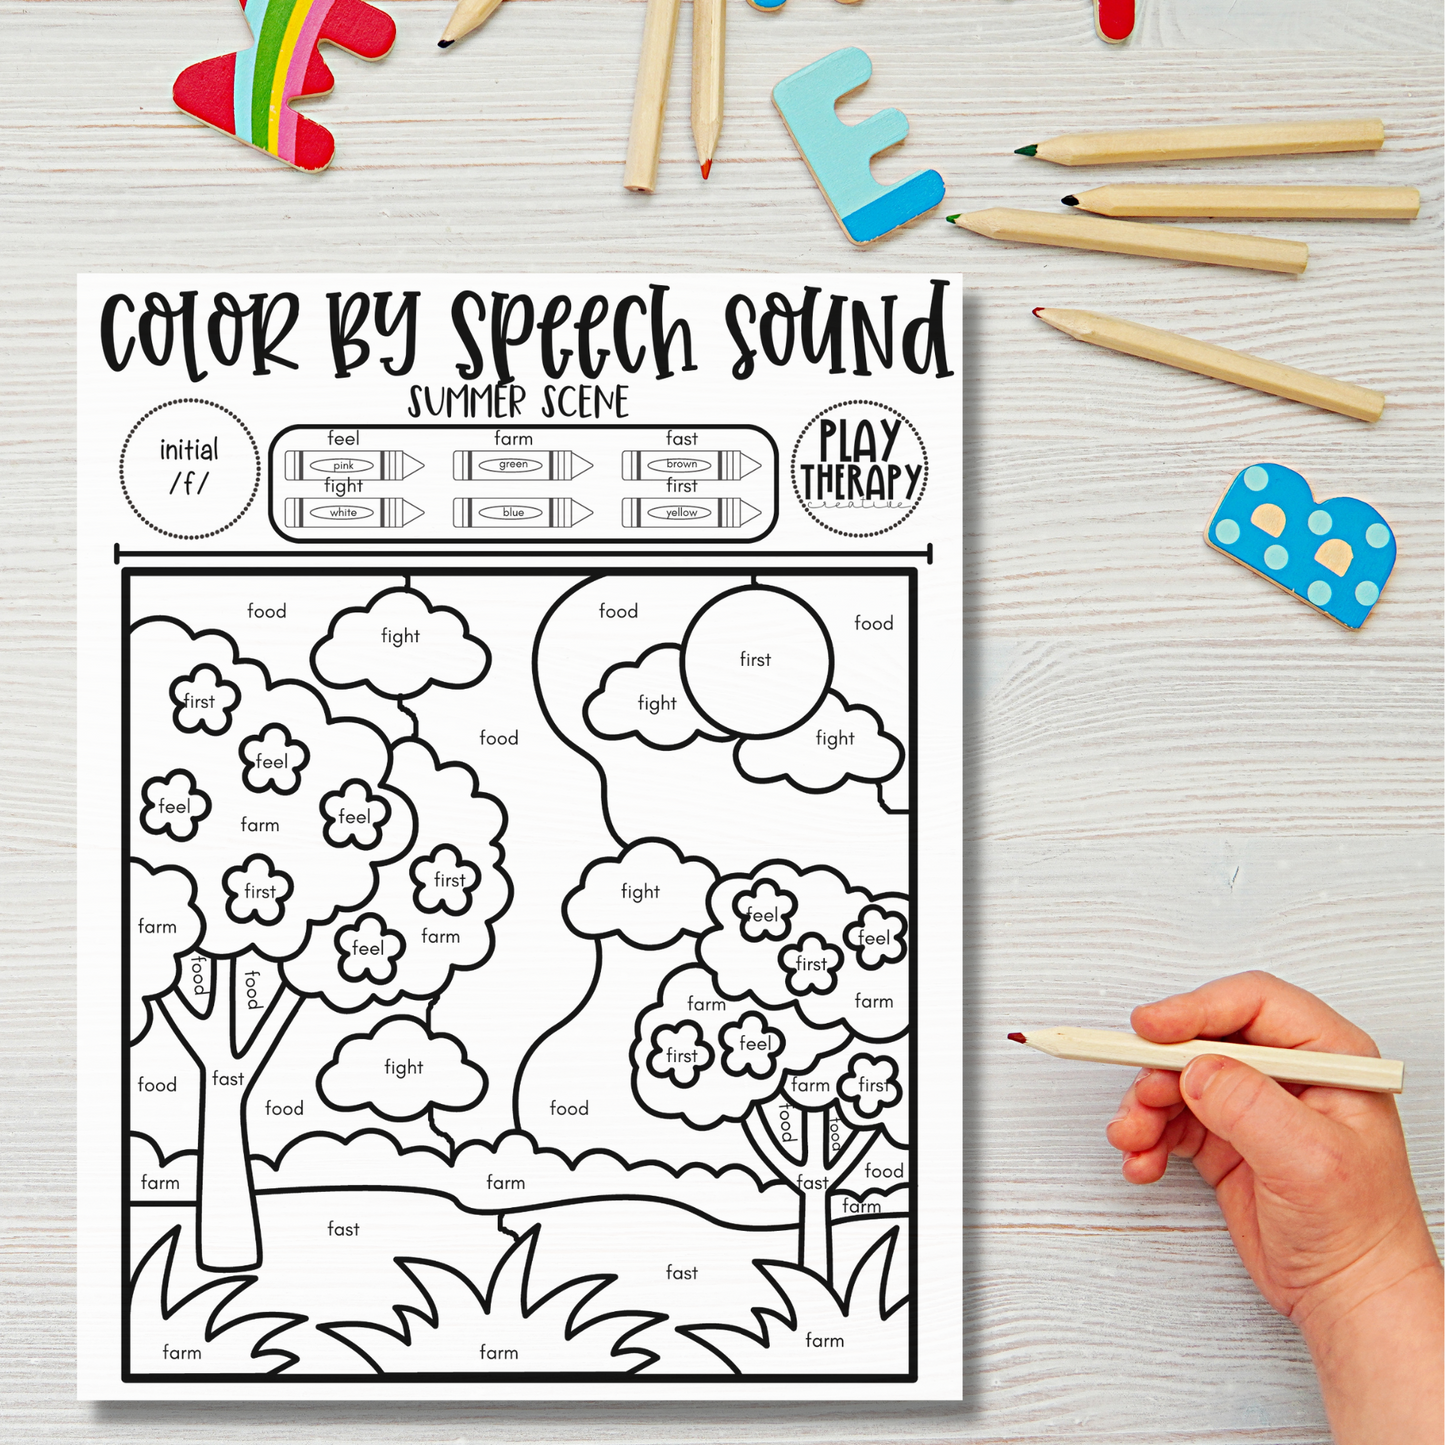 /f/ Sound Summer Themed Color-by-Speech-Sounds for Speech Therapy